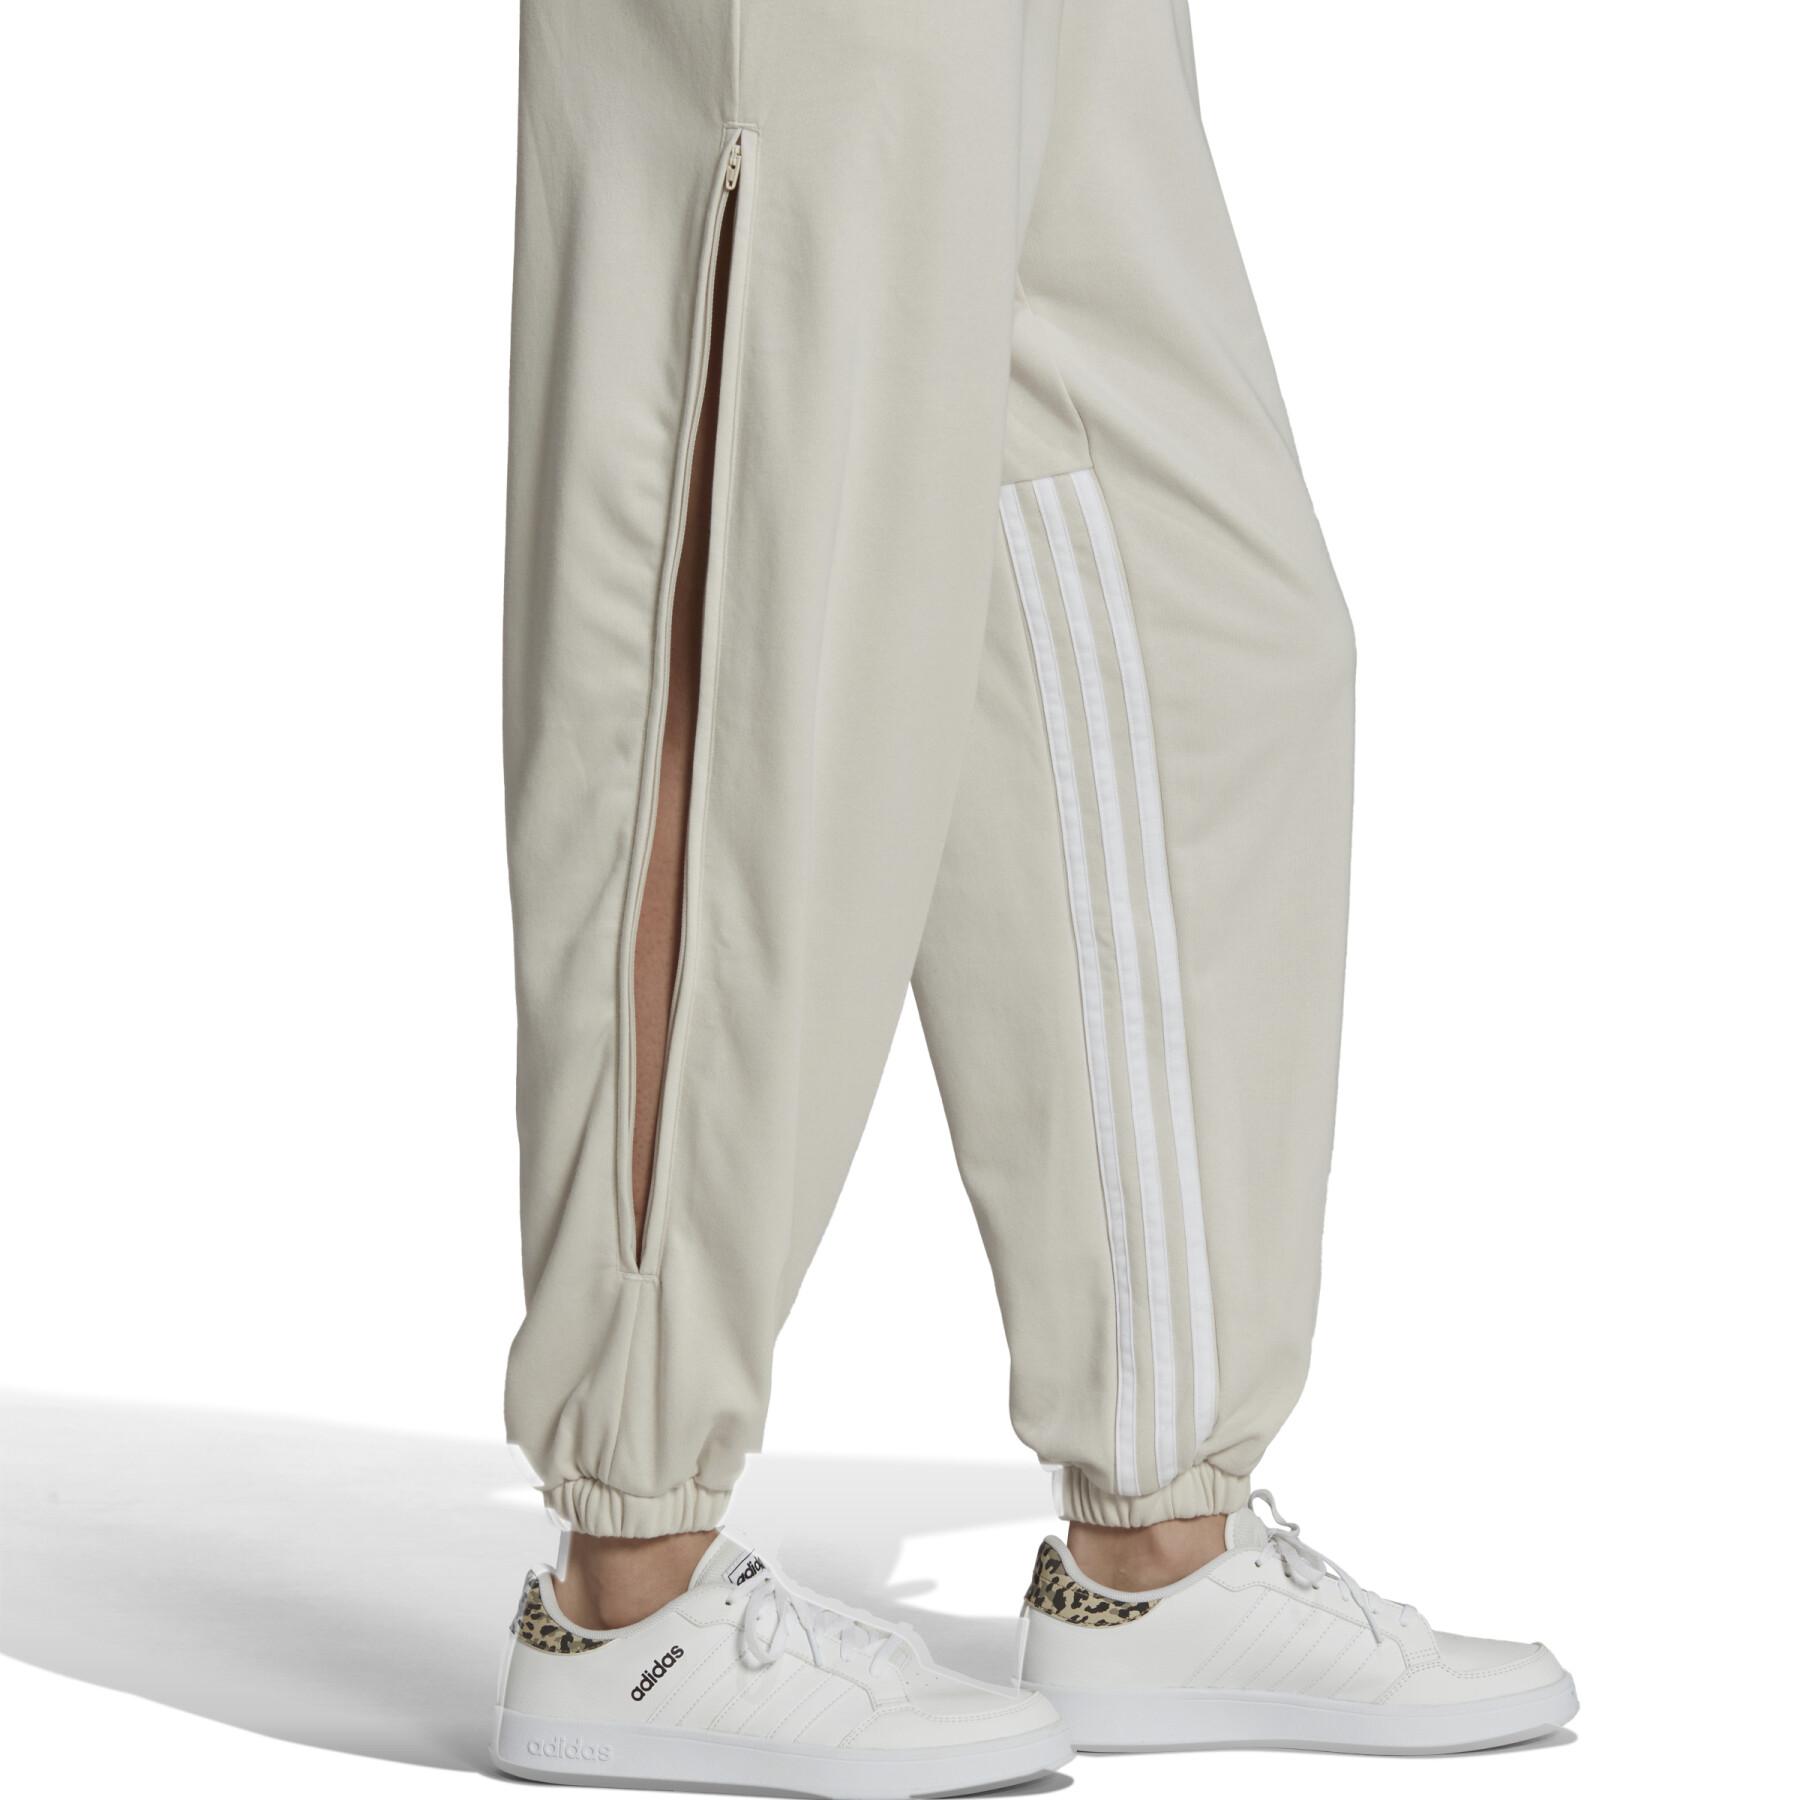 3-stripes jogging suit with side zippers woman adidas Hyperglam Oversized